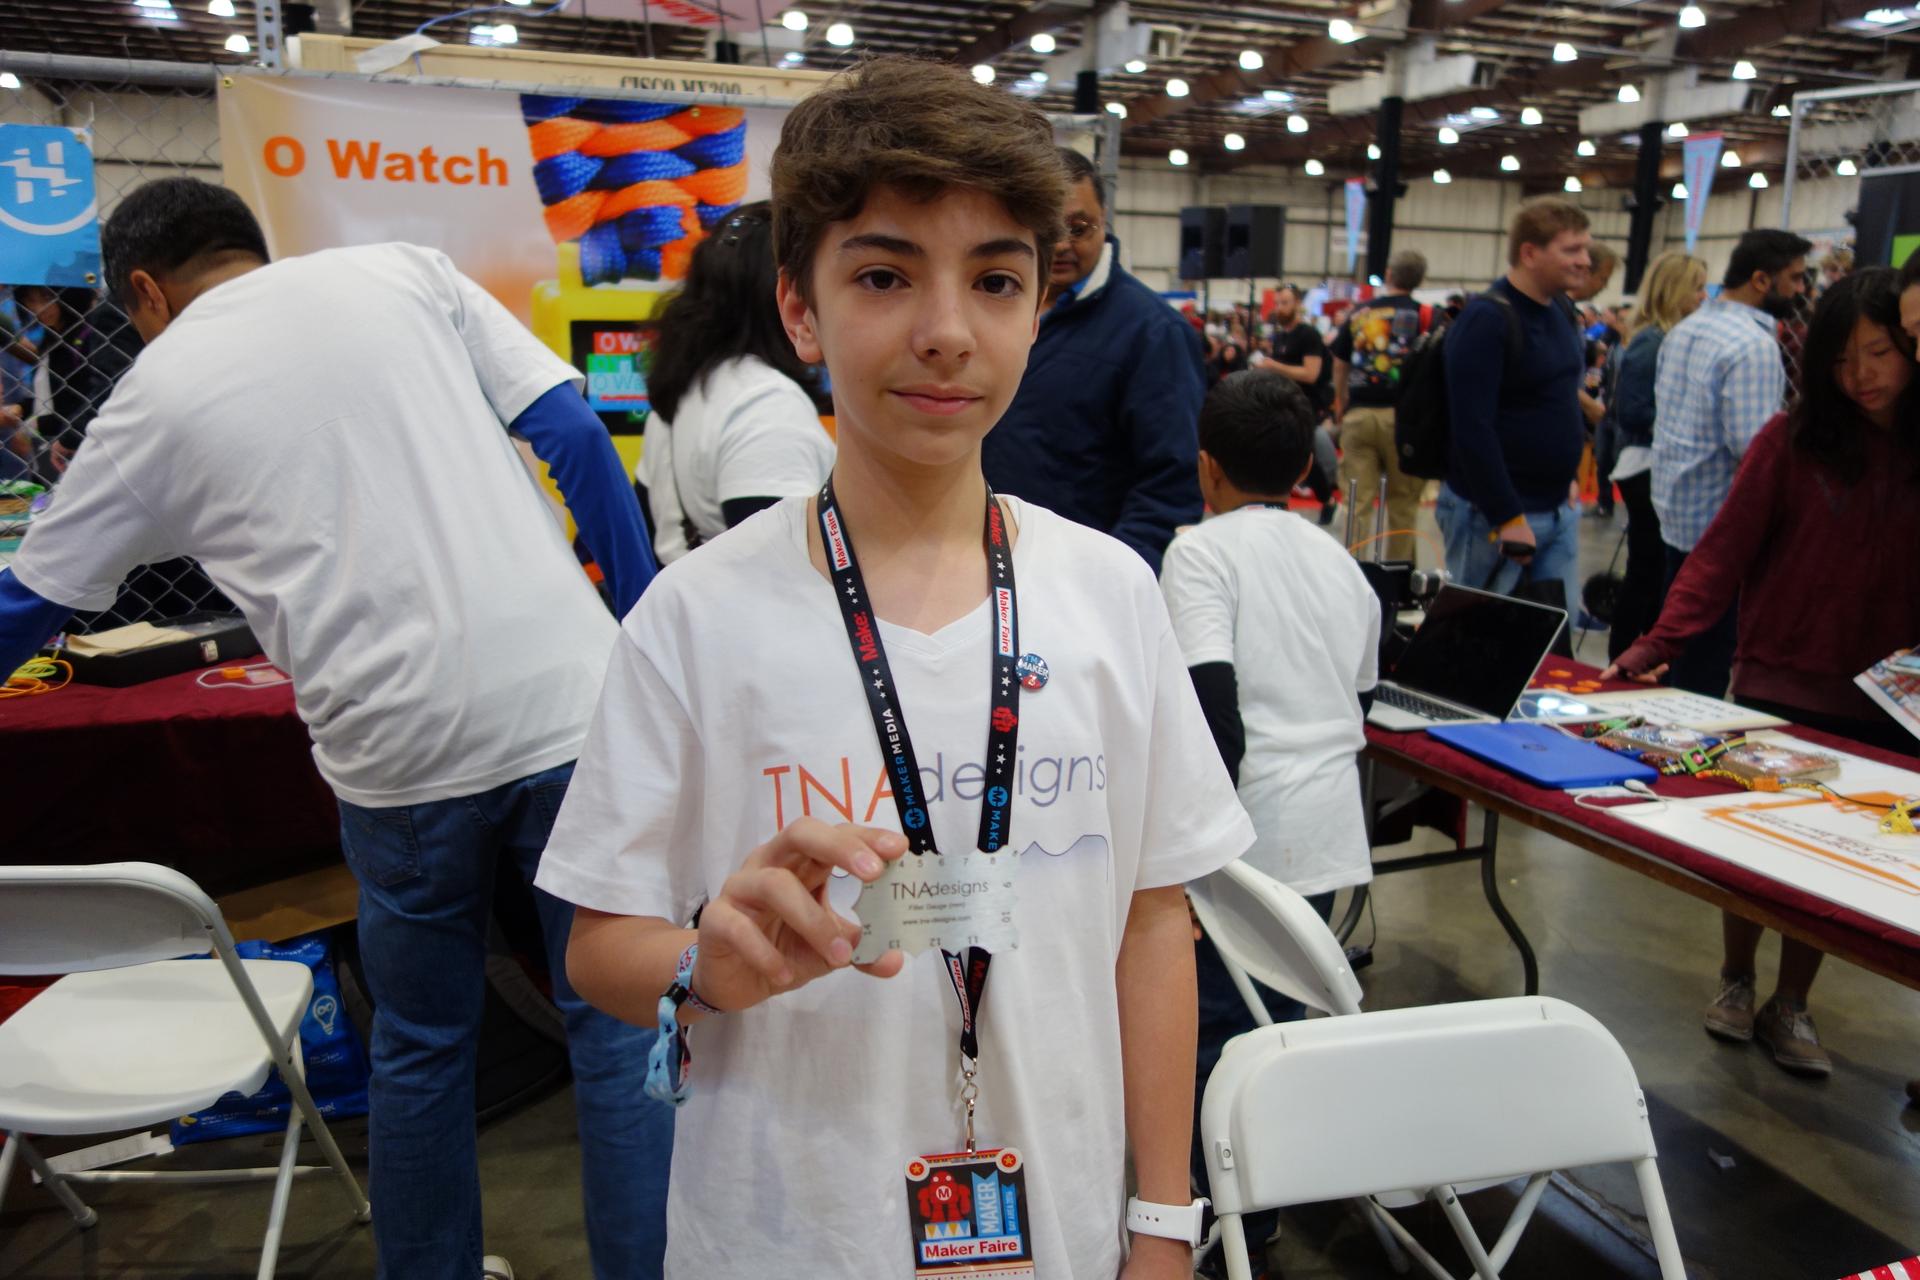 Tuna Tumer, 14, from Ankara, Turkey, with one of his inventions, at the 2016 Silicon Valley Maker Faire in San Mateo, CA